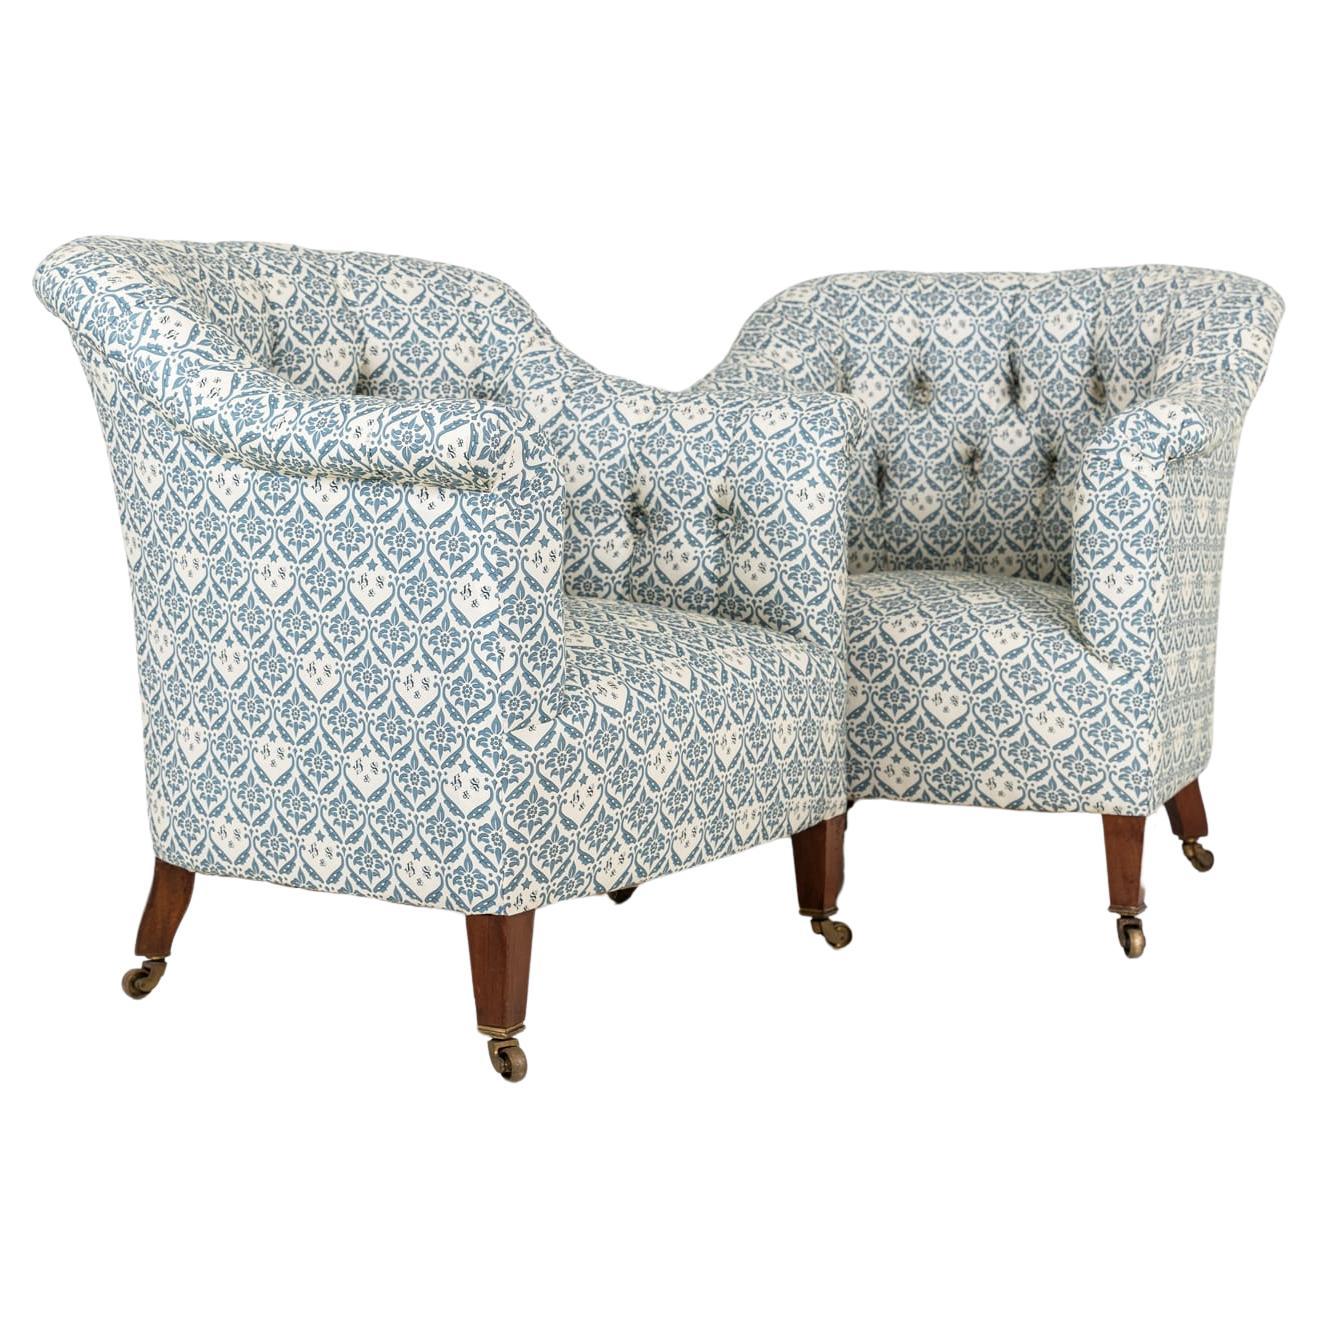 Pair of Antique Howard & Sons 'Pickwell' Country House Armchairs, circa 1920 For Sale